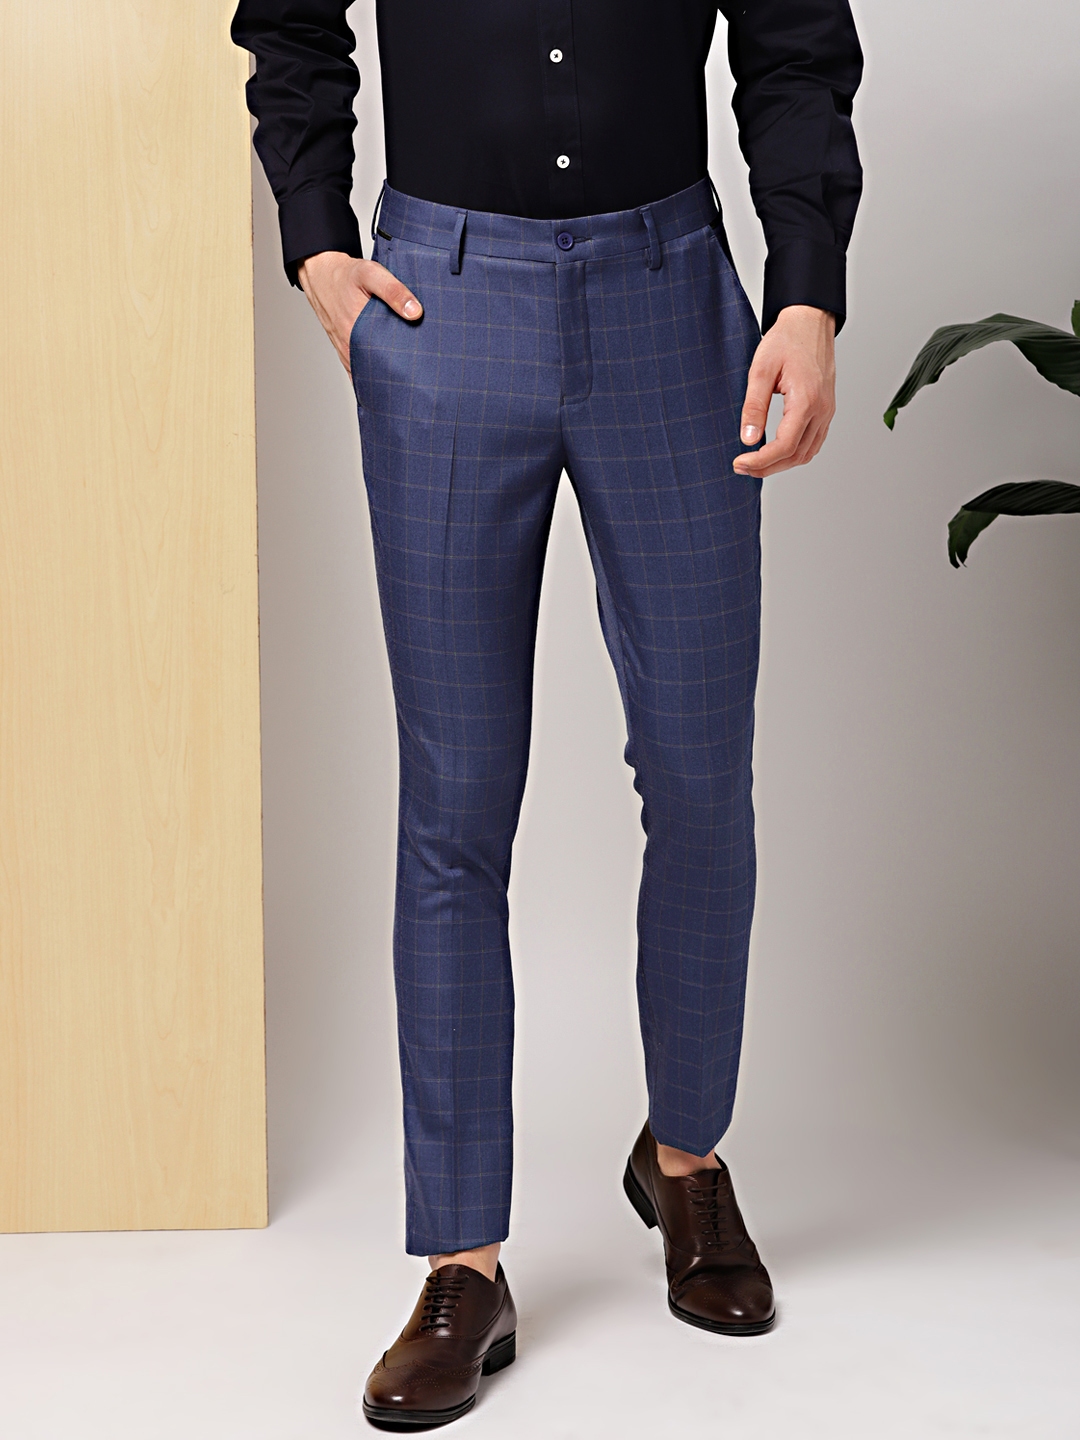 Jainish Mens Cream Cotton Checked Formal Trousers  Jompers